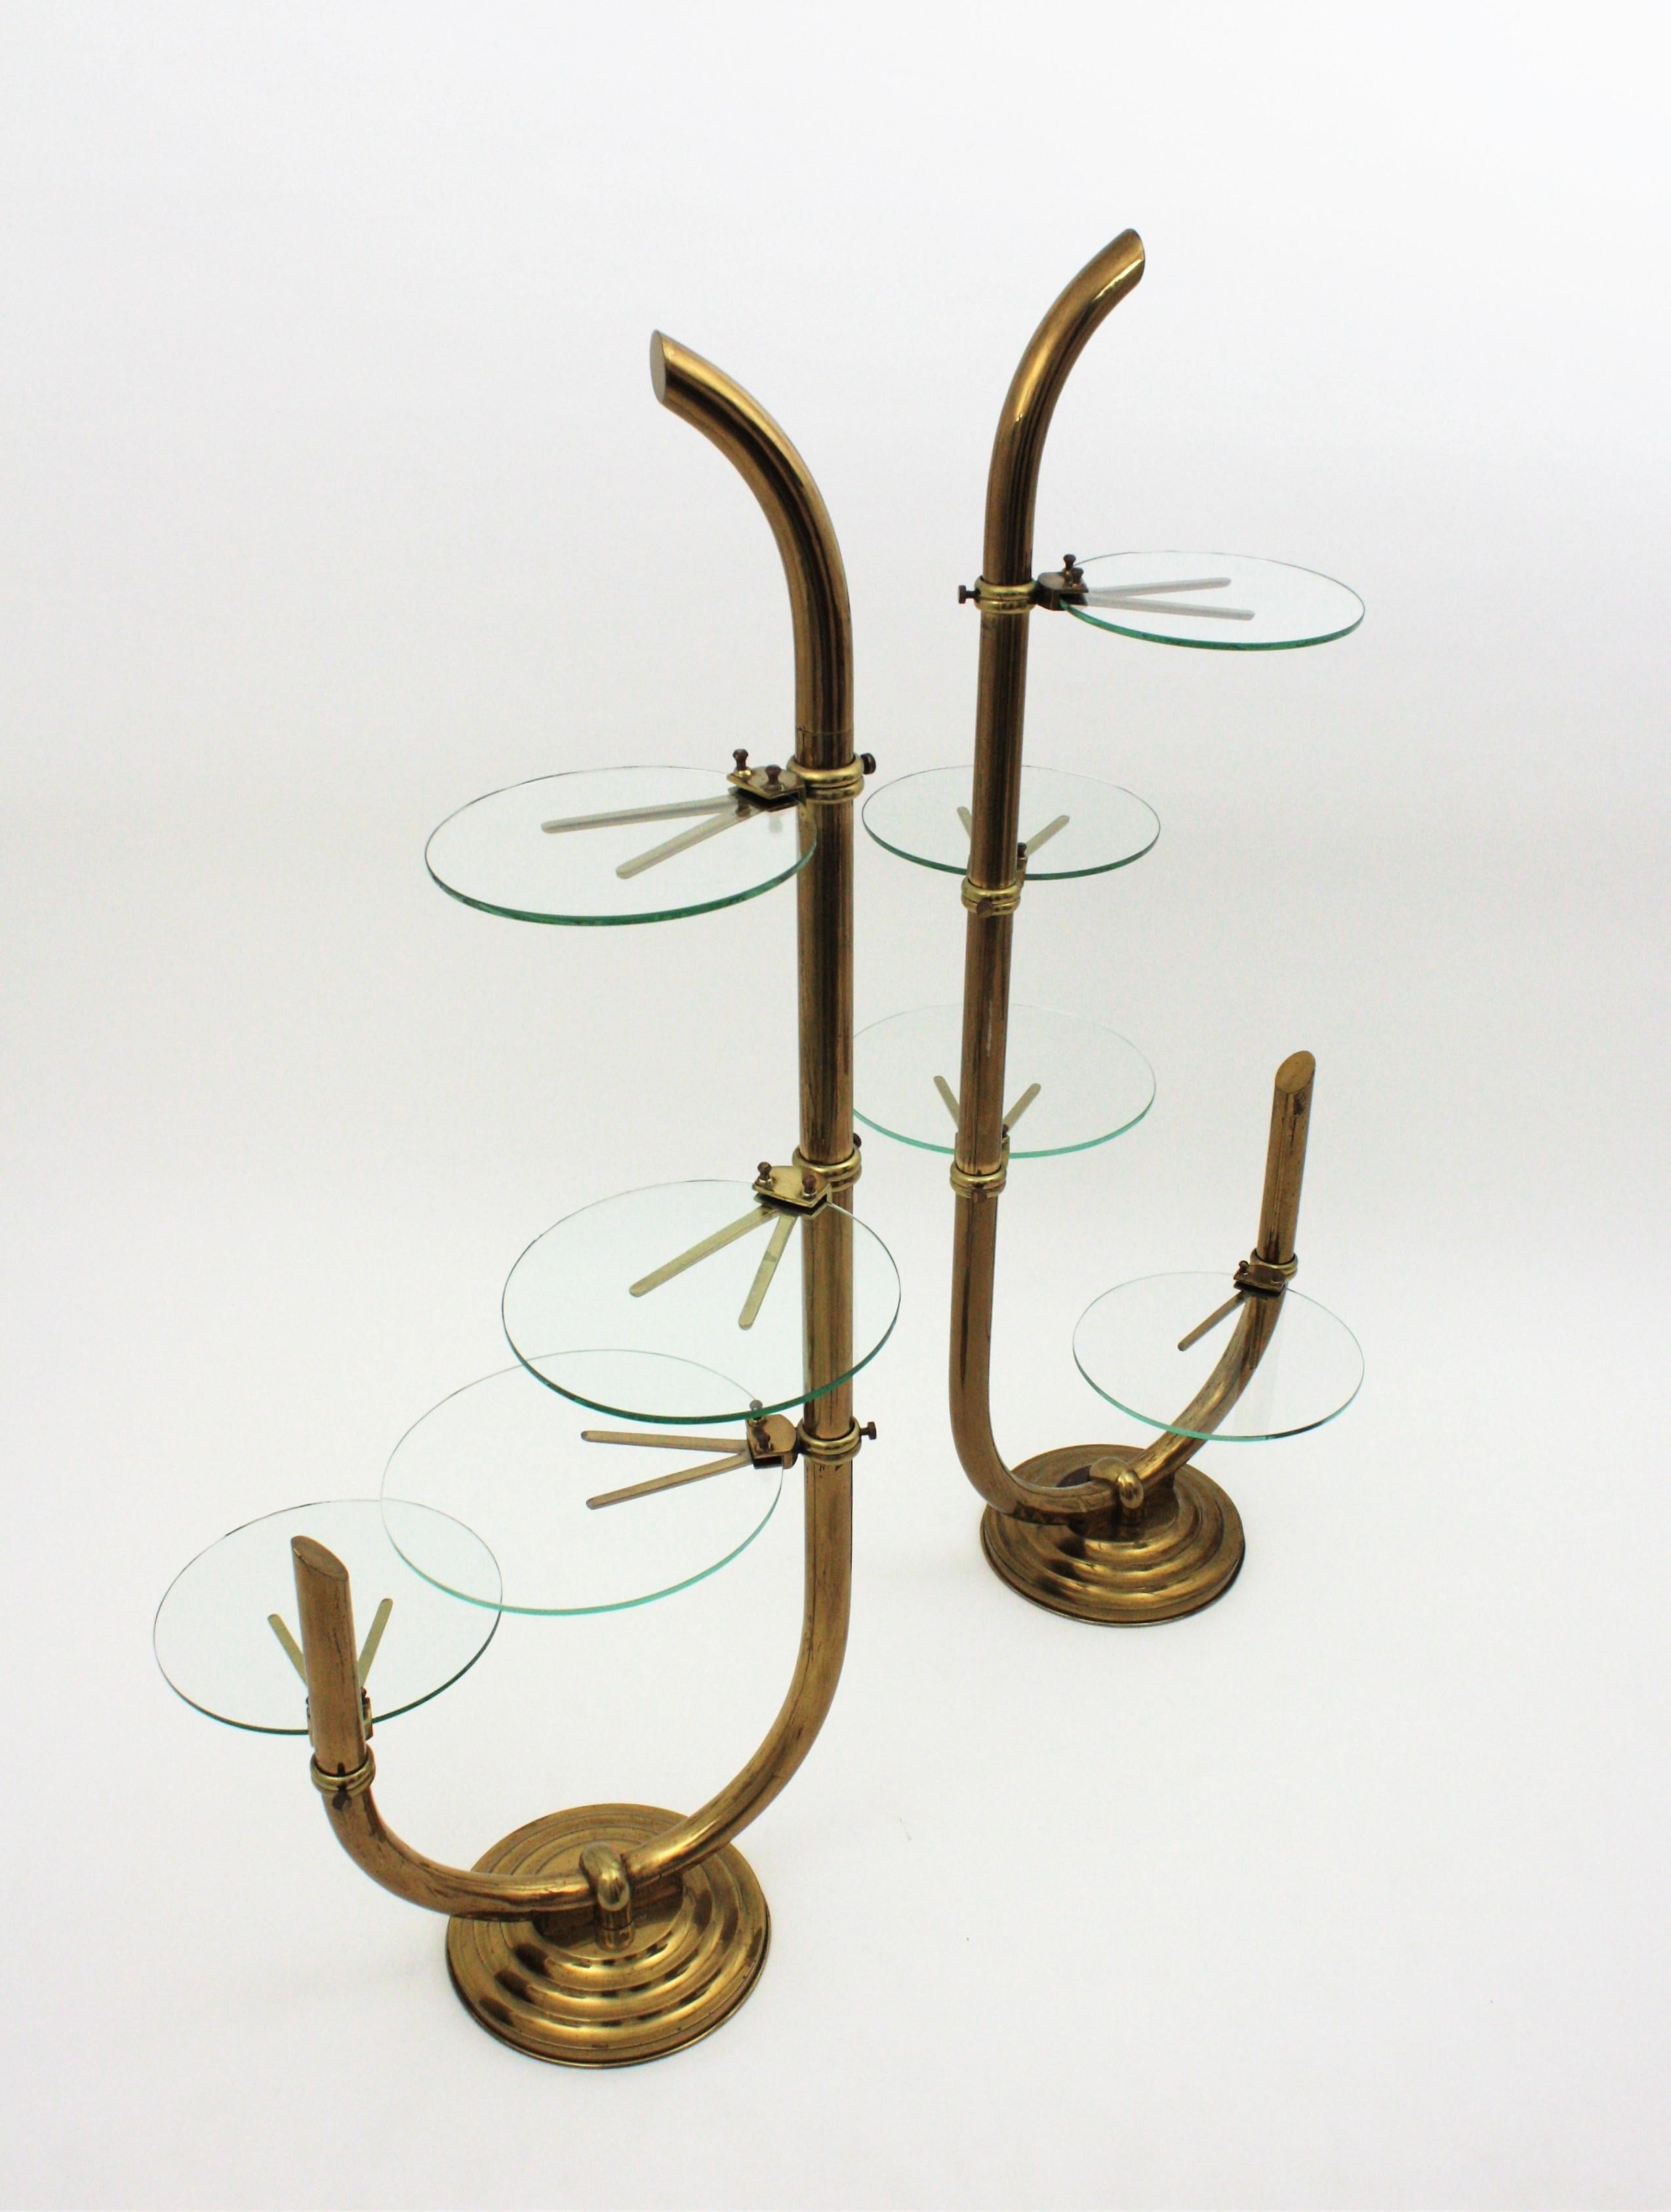 Art Deco Brass Floor Shop Display Stands / Swivel Etageres with Shelves in Glass 4